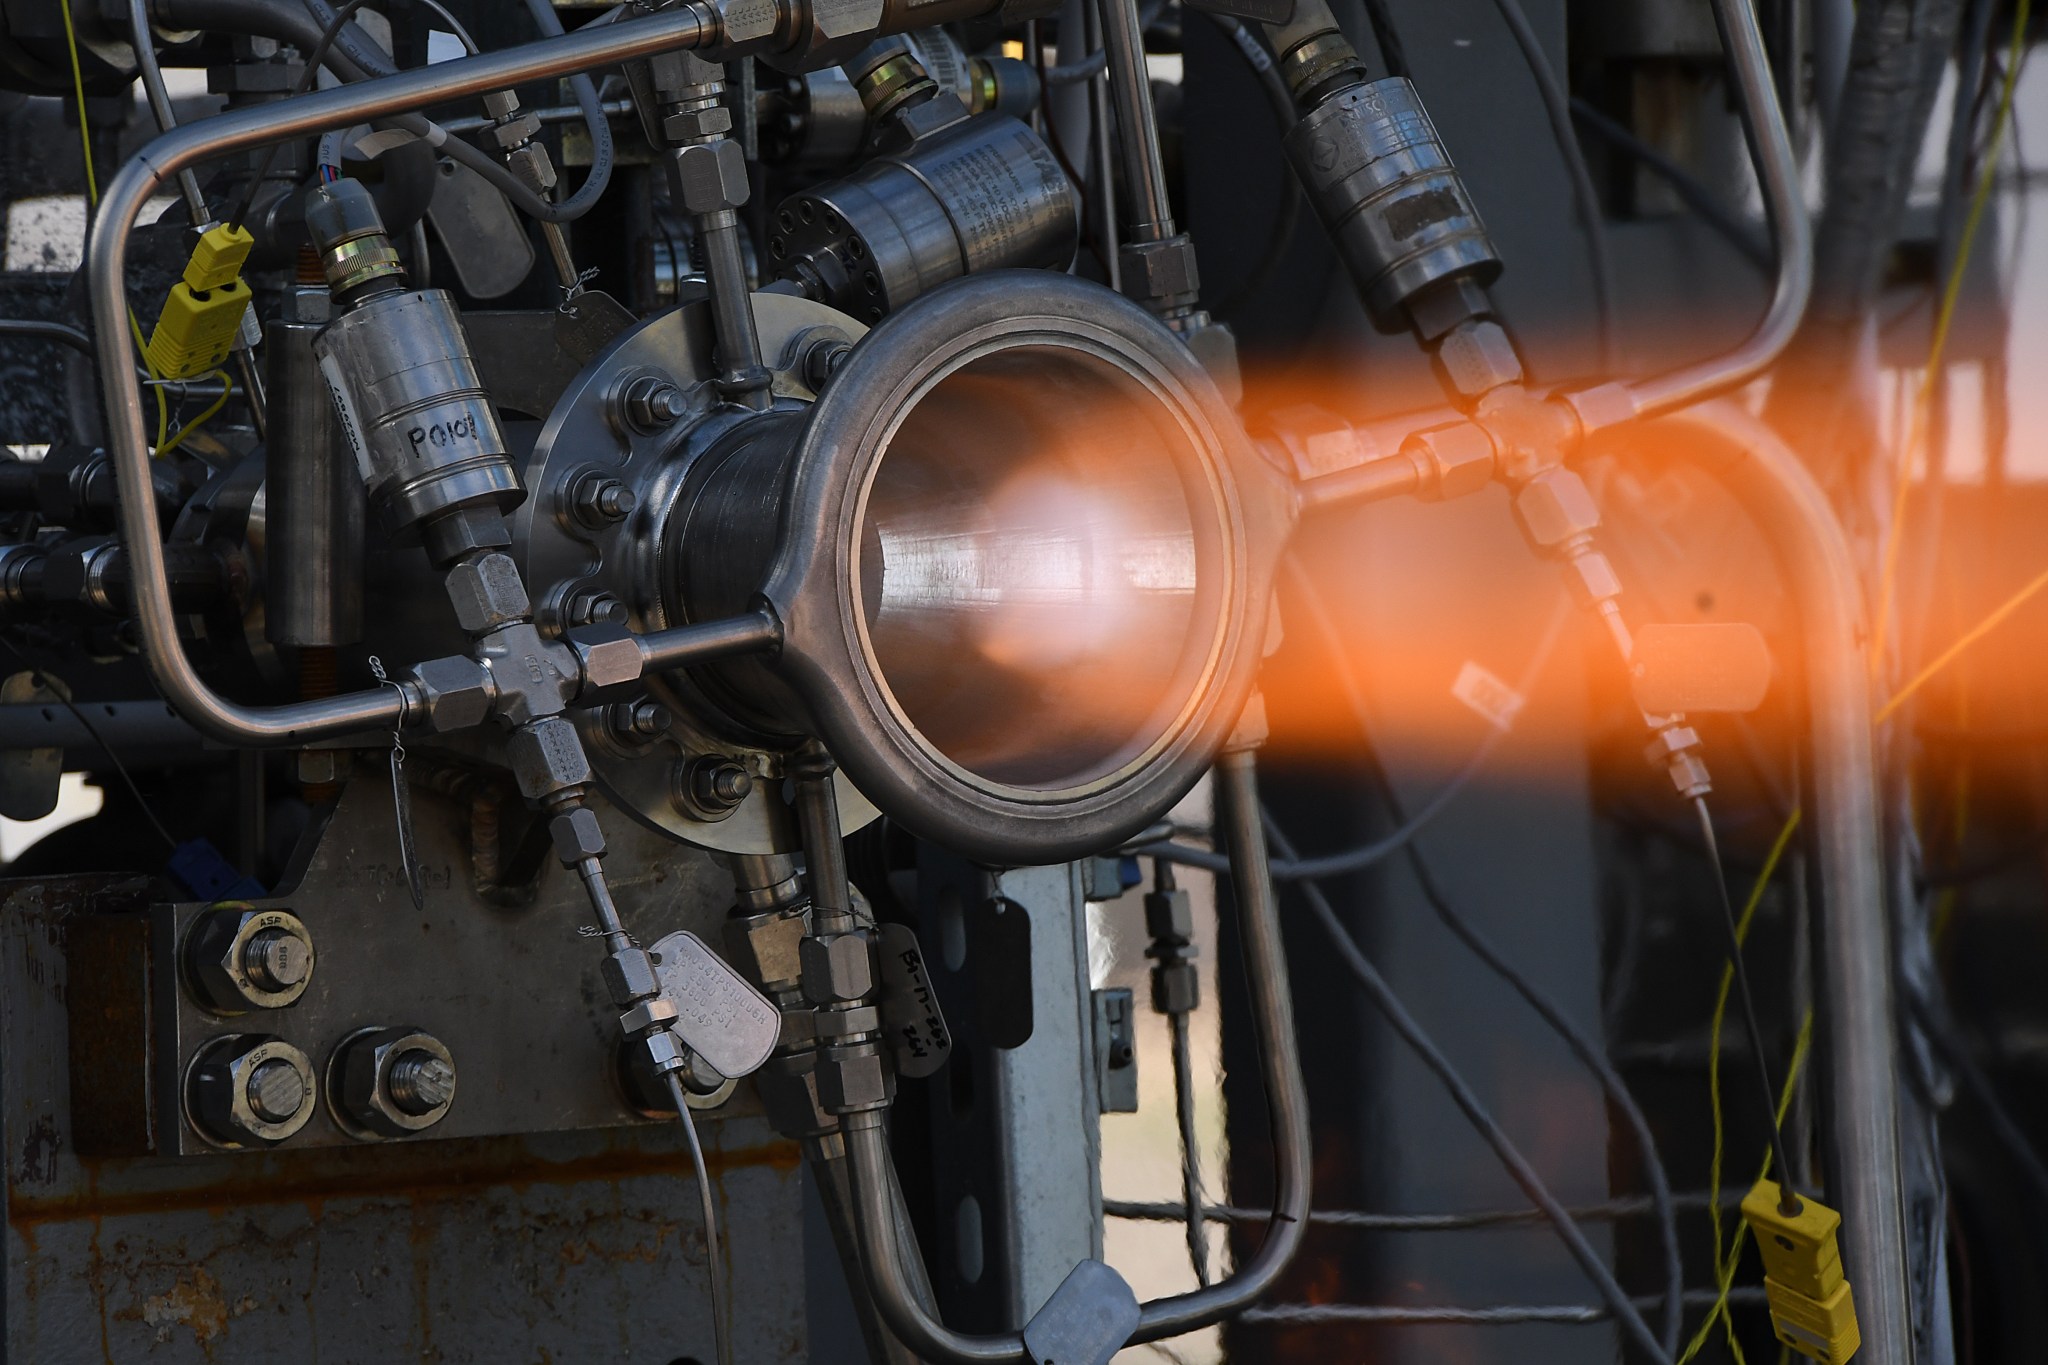 Through hot-fire testing at NASA's Marshall Space Flight Center, engineers put this nozzle through its paces.